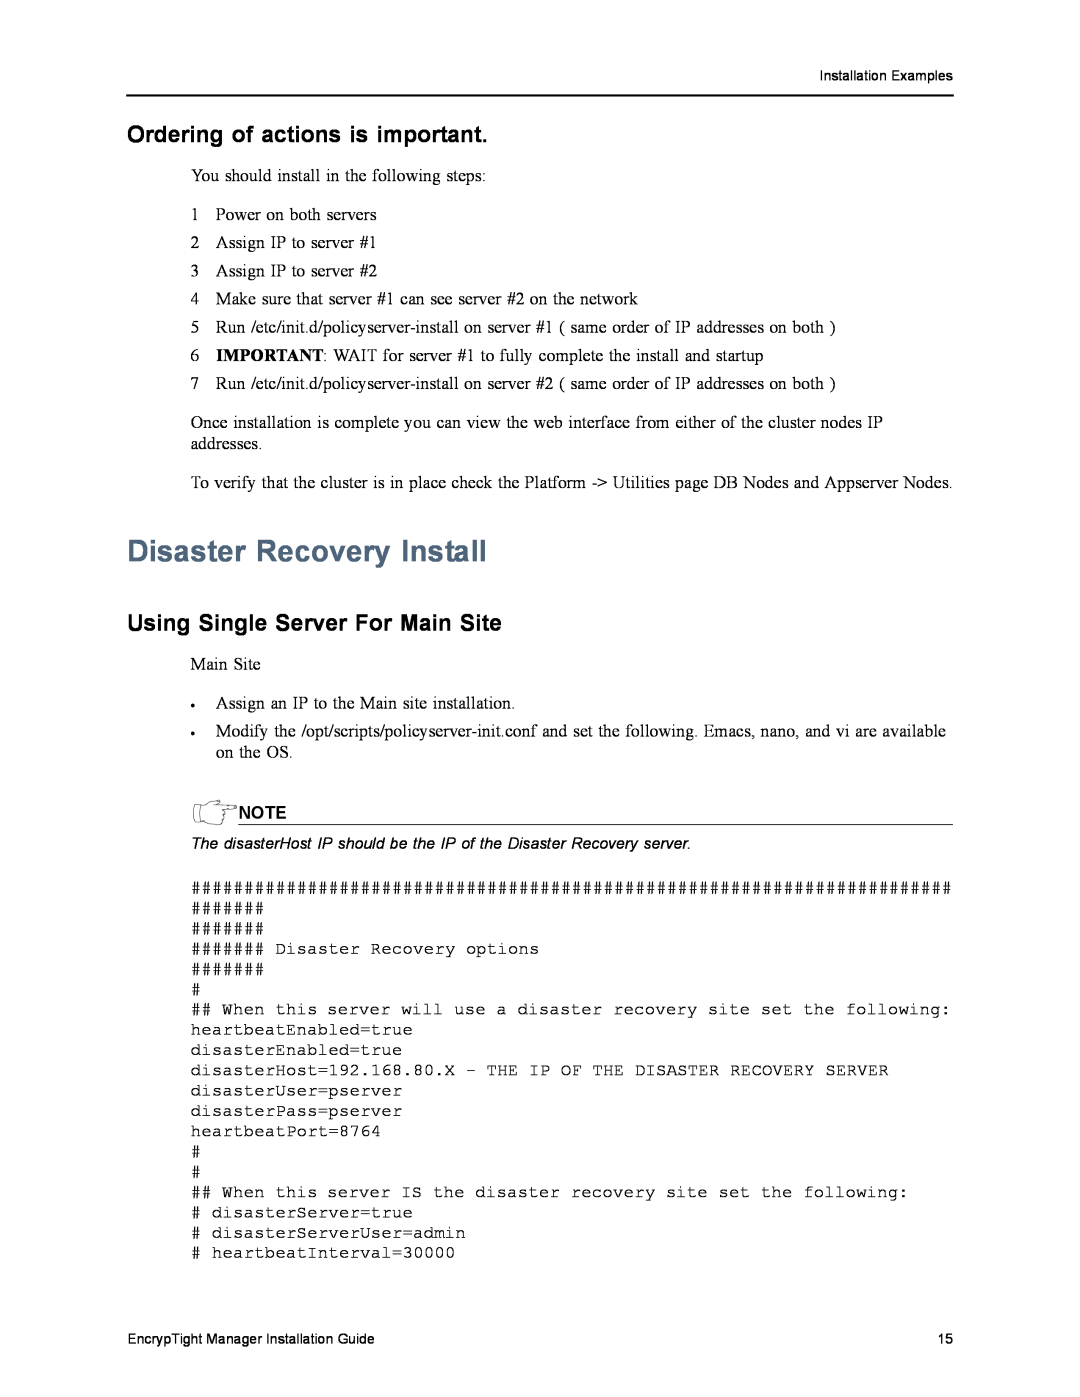 Black Box ET1000A, ET0010A Disaster Recovery Install, Ordering of actions is important, Using Single Server For Main Site 